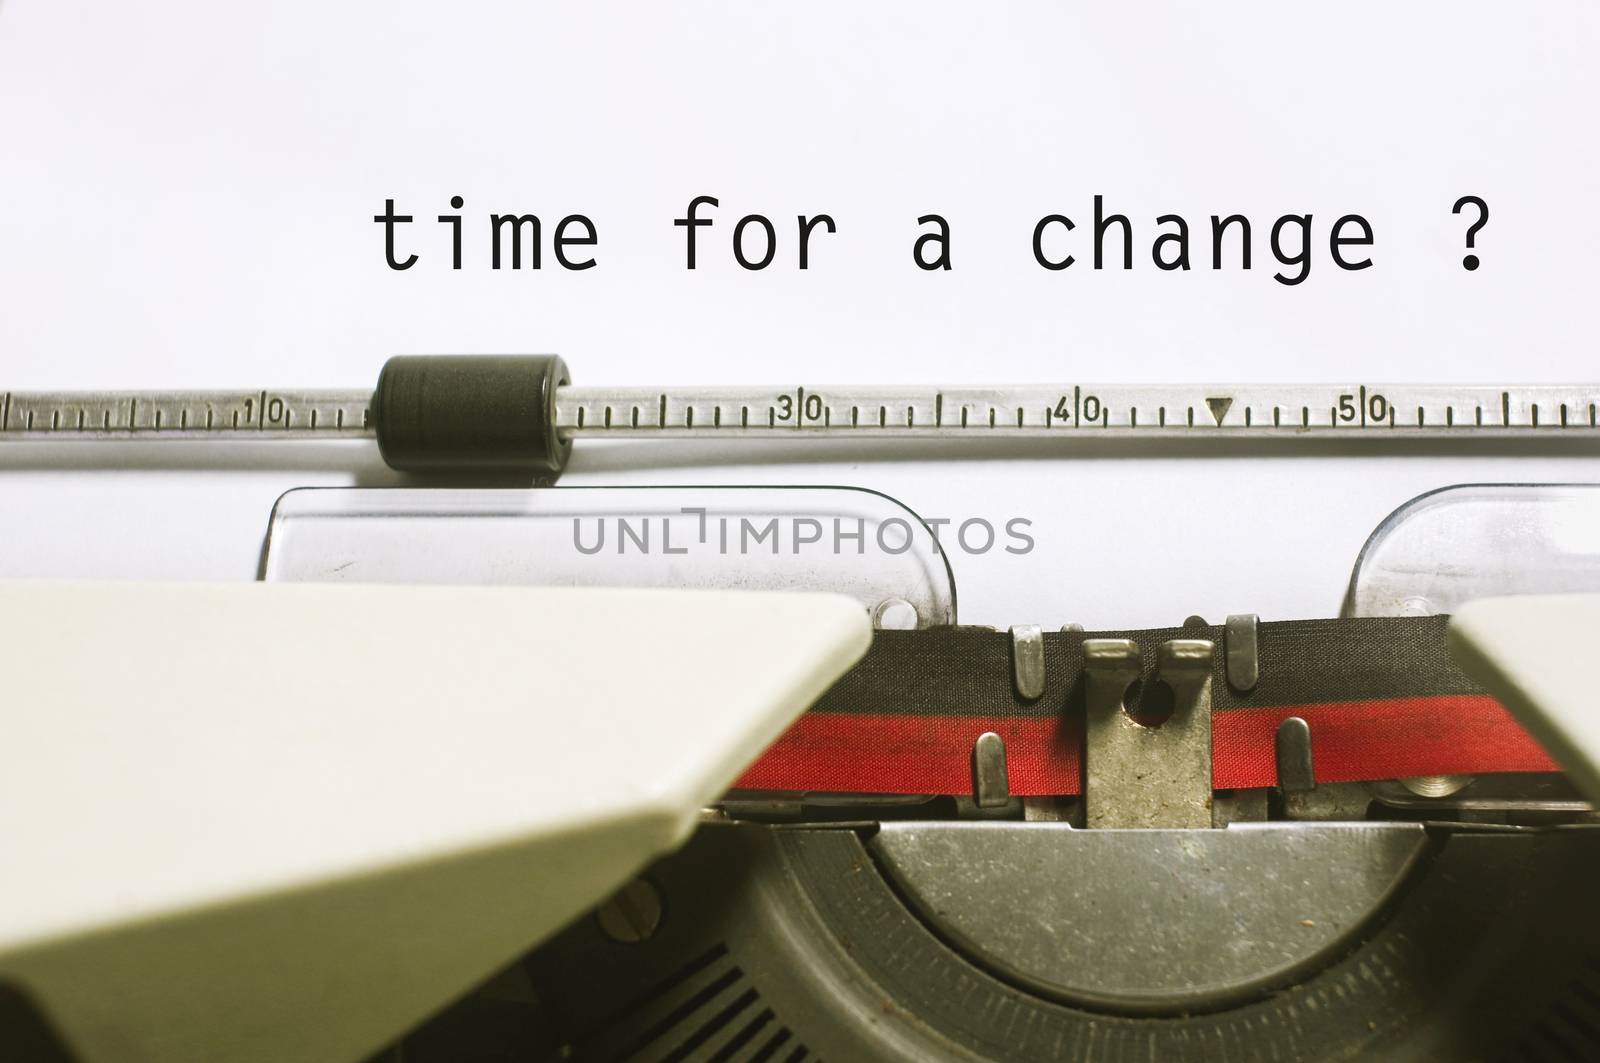 message of time for a change, for conceptual purpose.